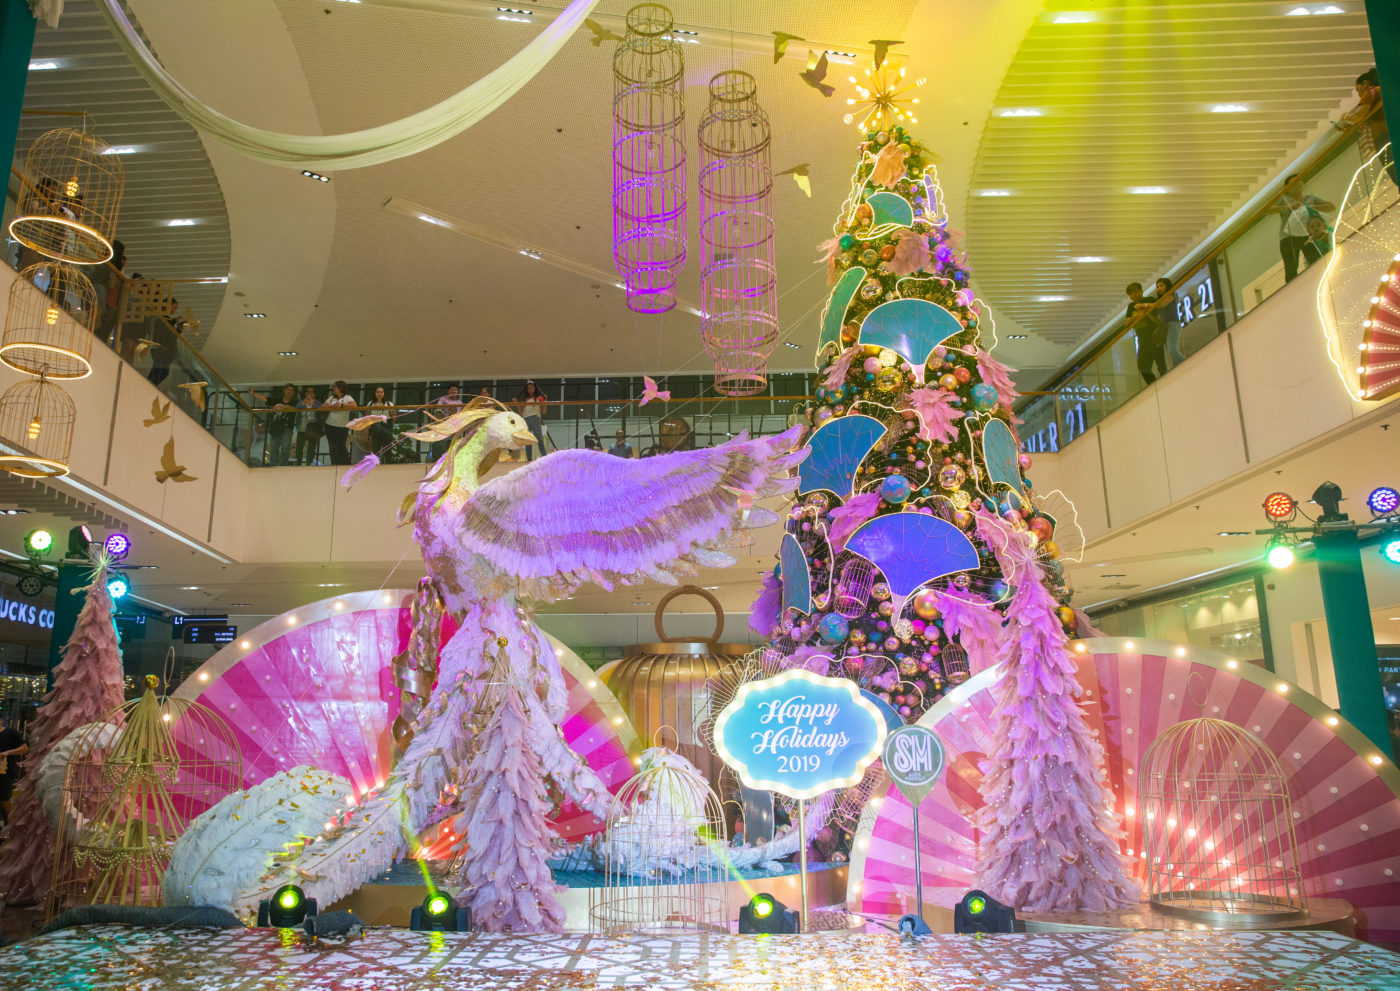 SM kicks off Christmas nationwide with #SparklingSMallidays | Lifestyle.INQ